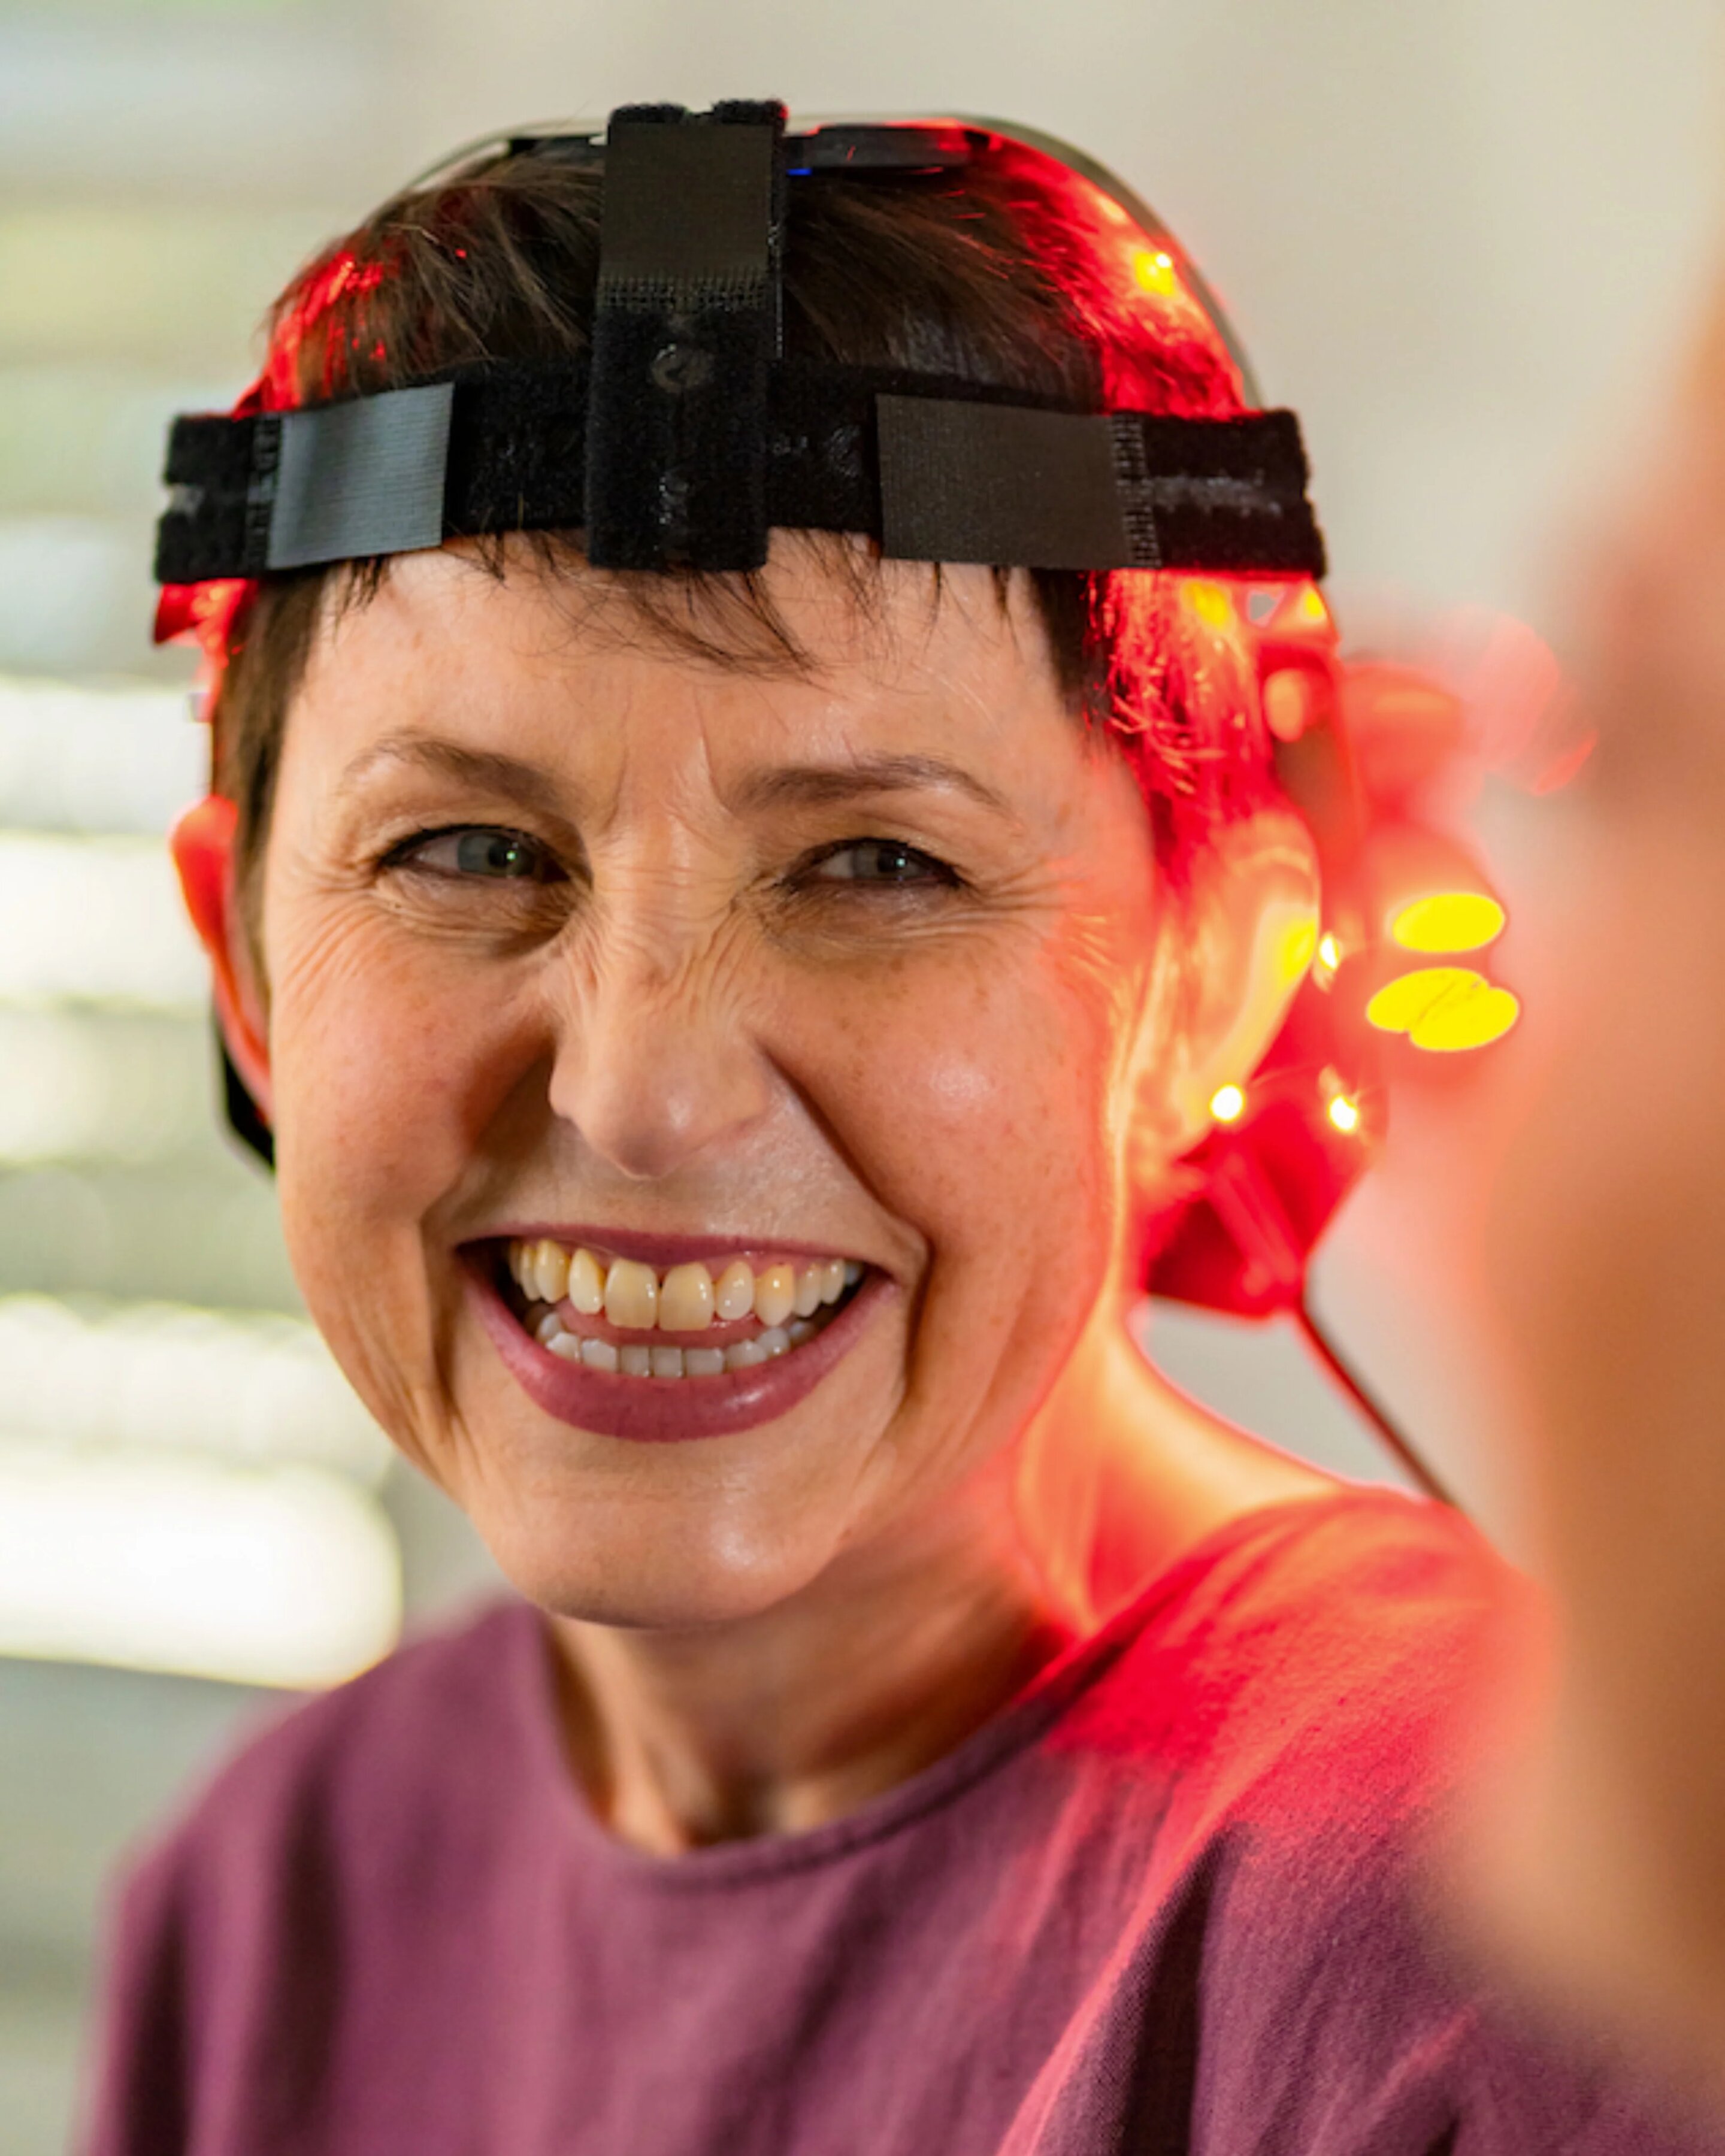 Parkinson’s research: Laser light helmet therapy helped ‘improve motor function’ in patients